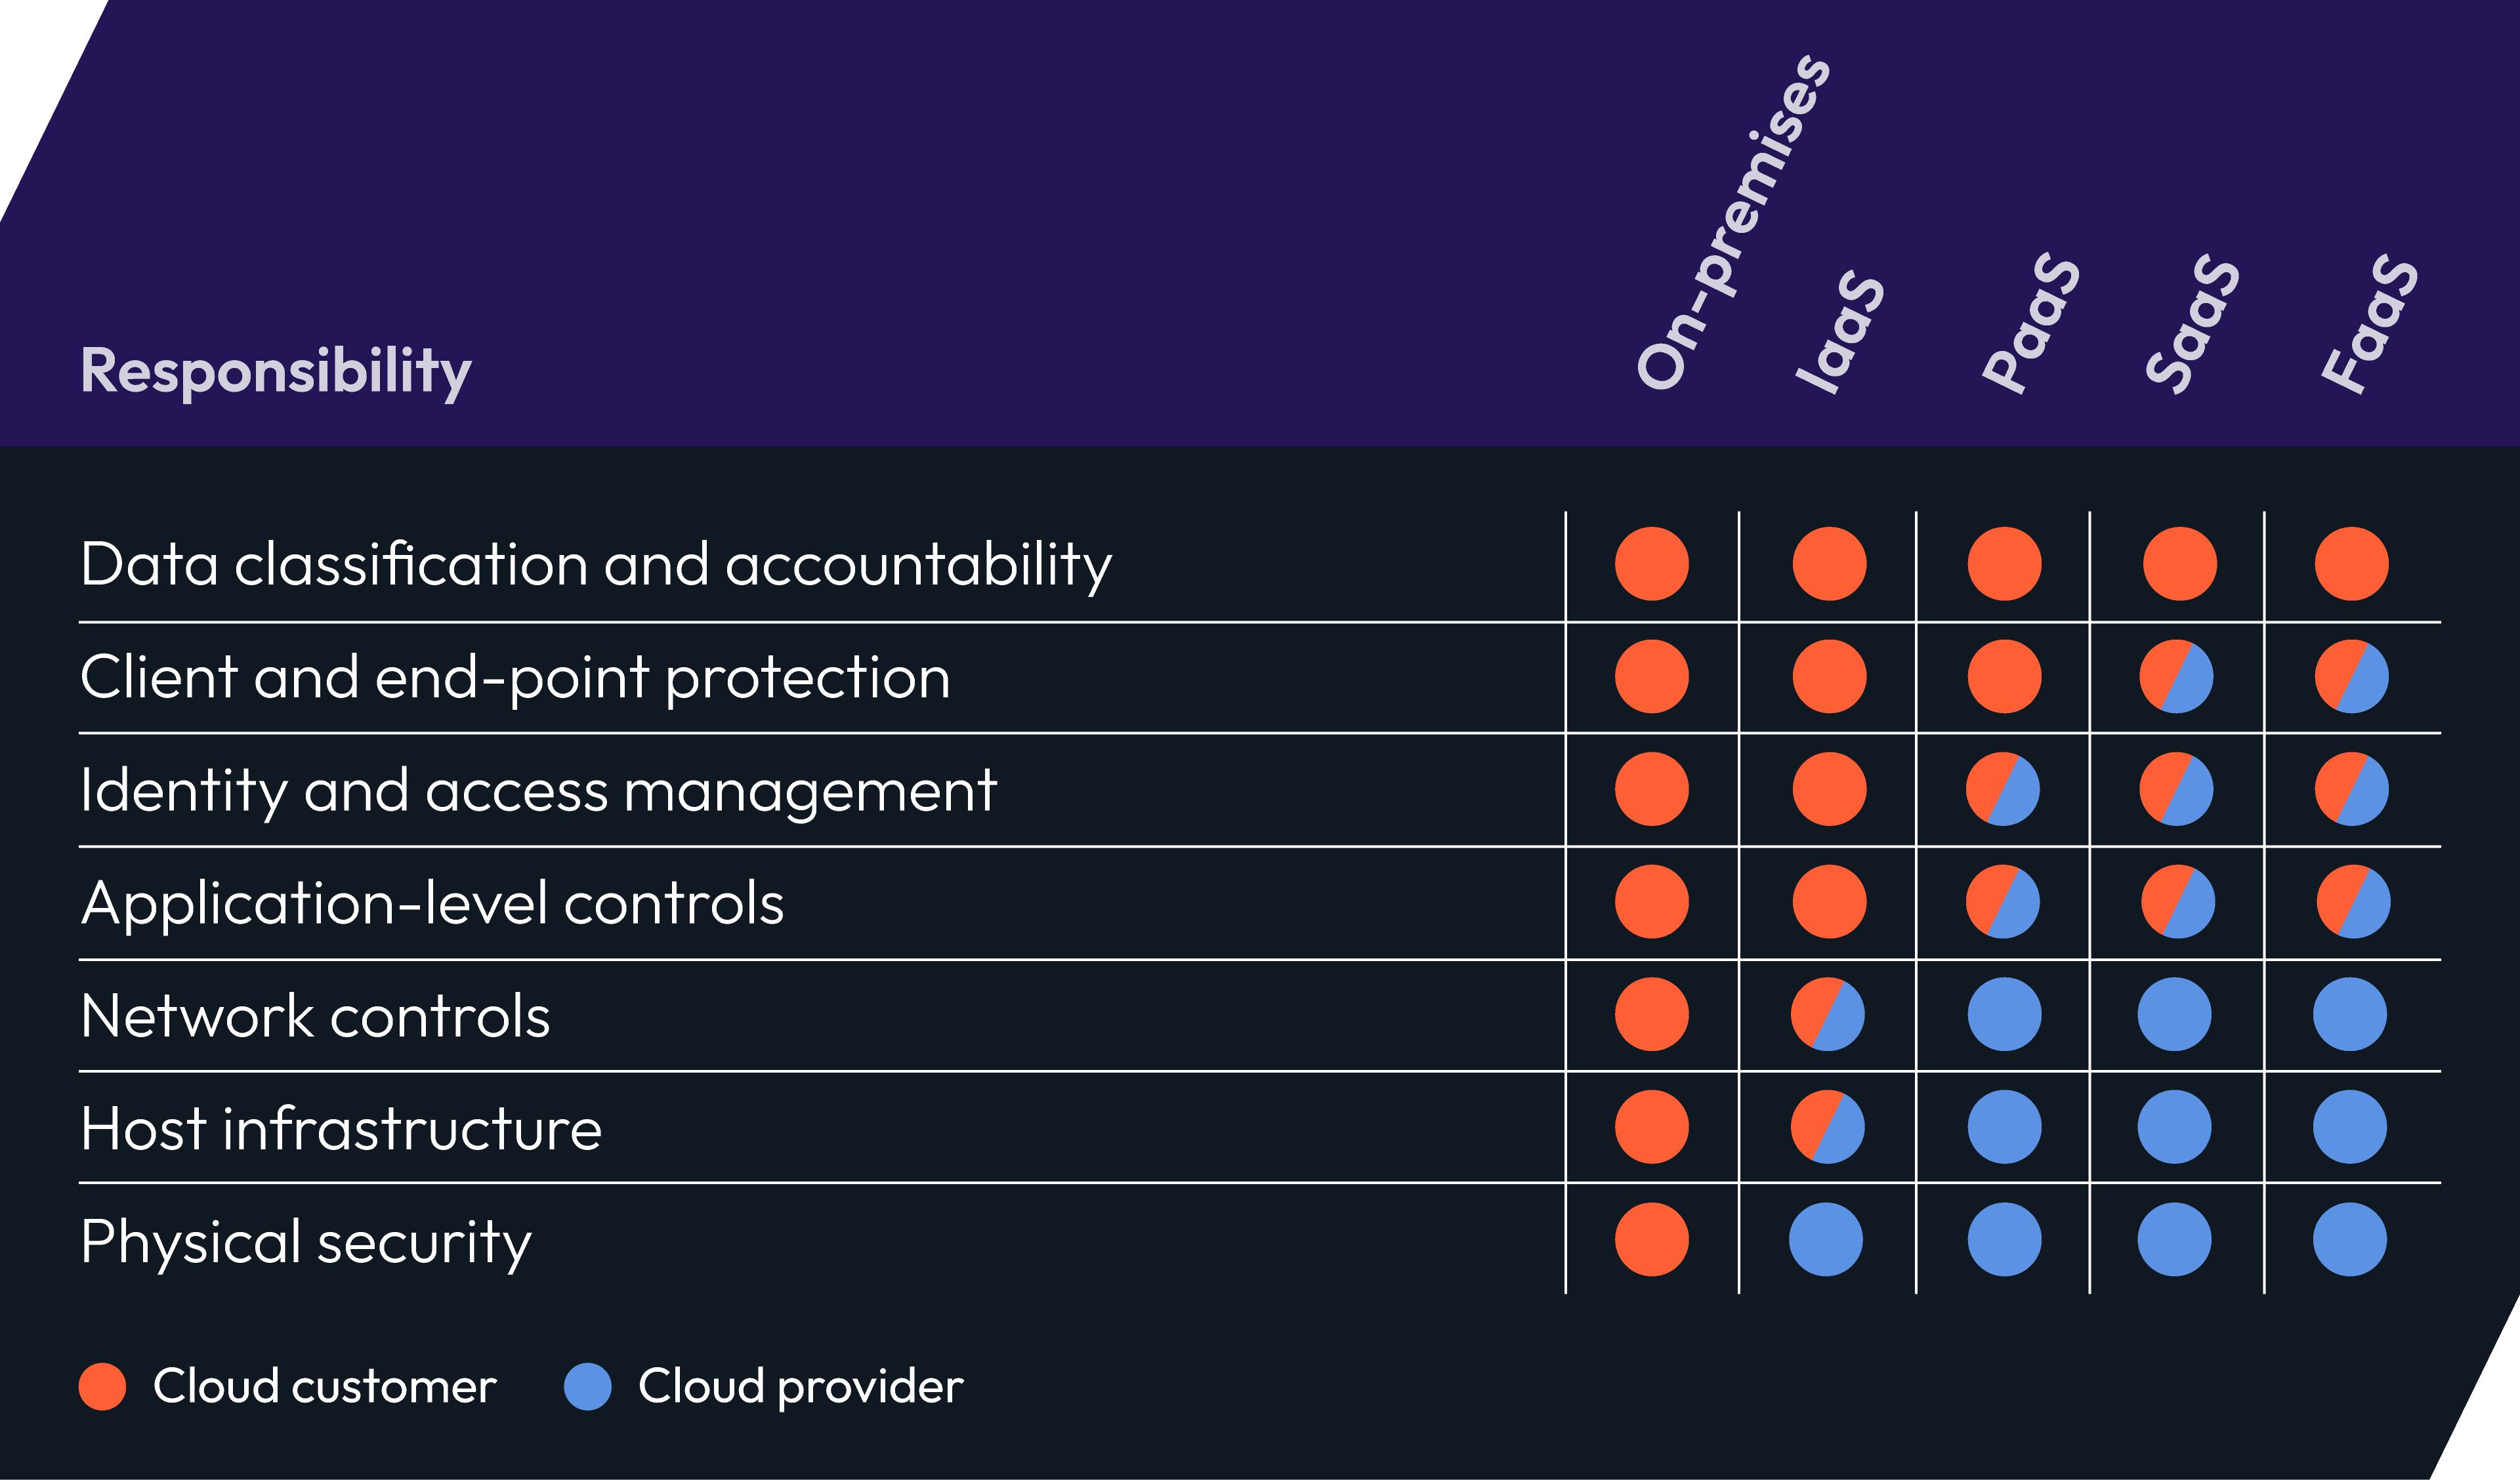 Table showing the distribution of responsibility between cloud customer and cloud provider for on-premises, IaaS, PaaS, SaaS, and FaaS solutions. Moving down the list of responsibilities (which include data classification and accountability; client and end-point protection; identity and access management; application-level controls, network controls; host infrastructure; physical security), and along the list of solutions from on-premises to FaaS, responsibility moves from 100% cloud customer at the top left, to a 50% split in the center, and 100% cloud provider responsibility in the bottom-right.